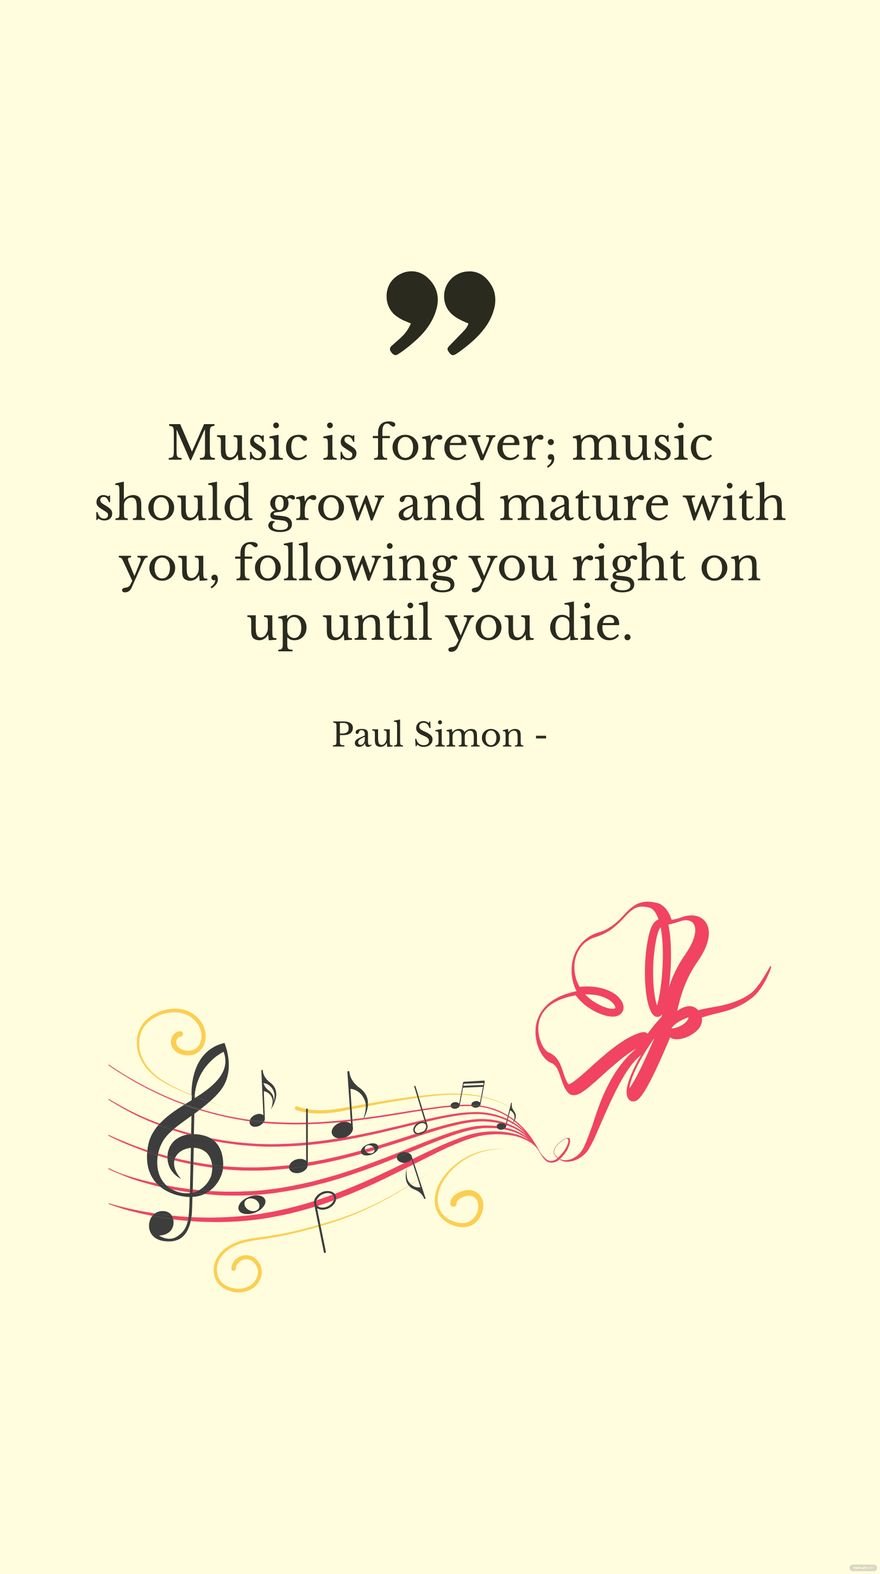 Paul Simon - Music is forever; music should grow and mature with you, following you right on up until you die.